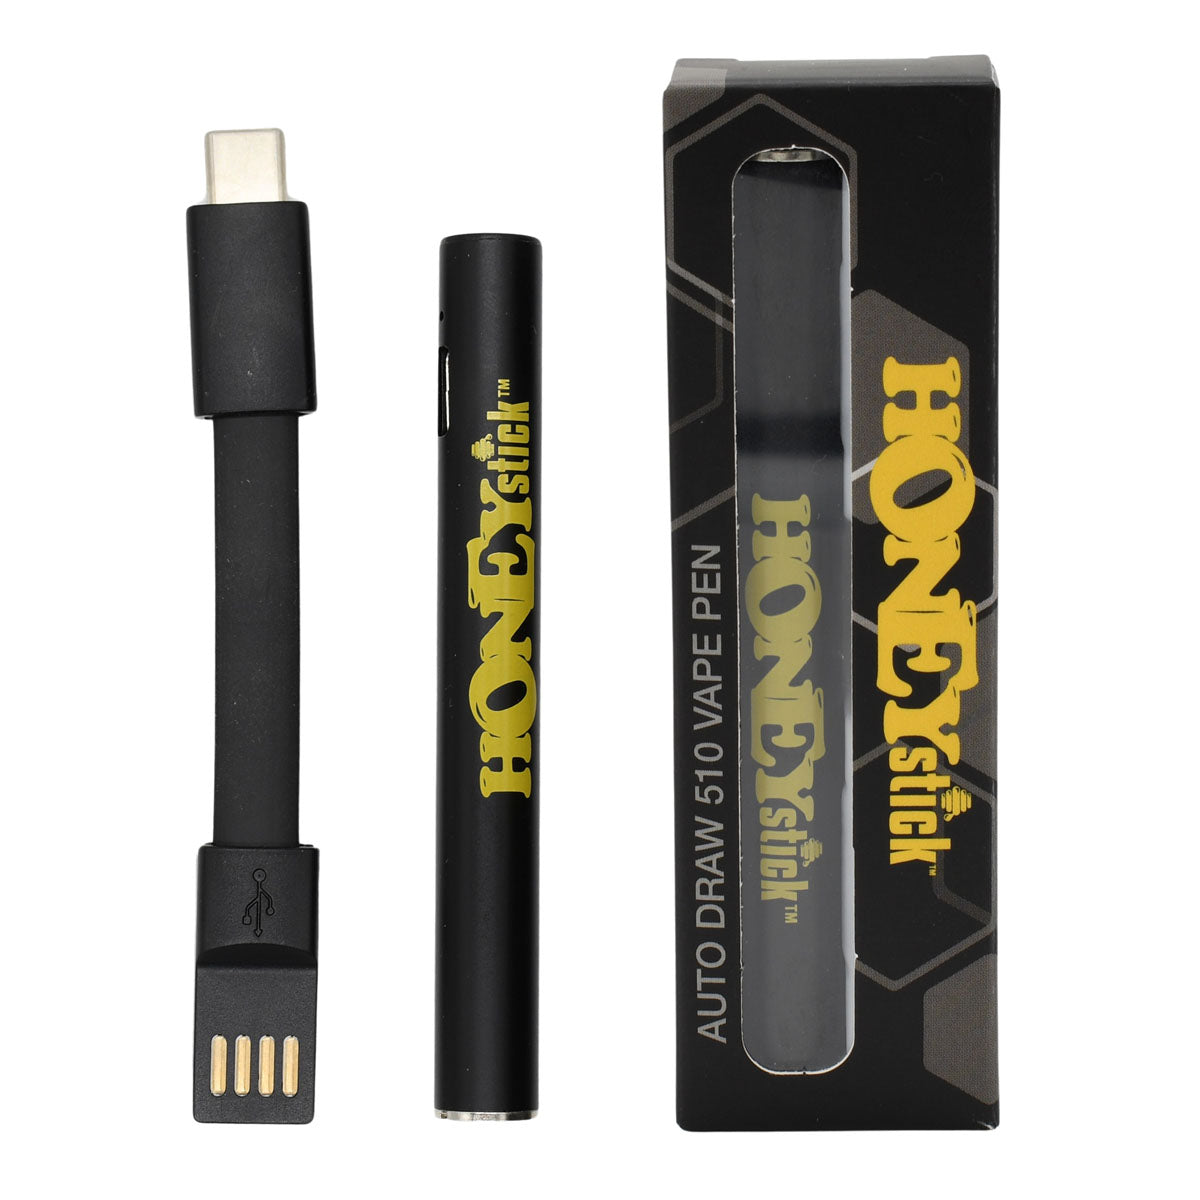 HoneyStick Auto Draw 510 Vape Pen Battery with USC-C charging cable included